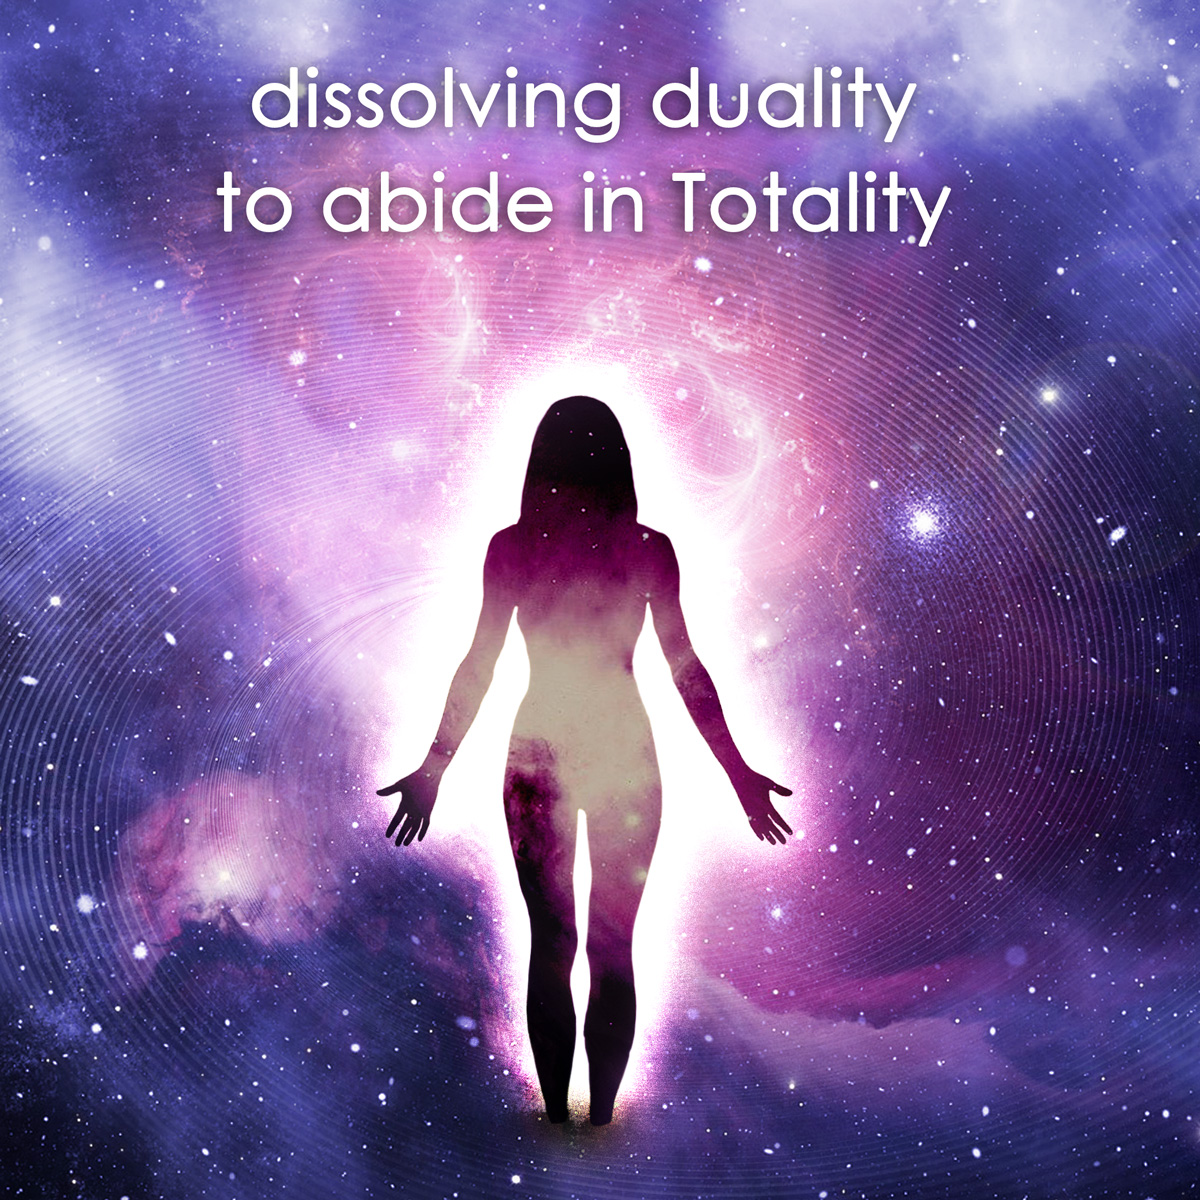 Dissolving duality to abide in totality